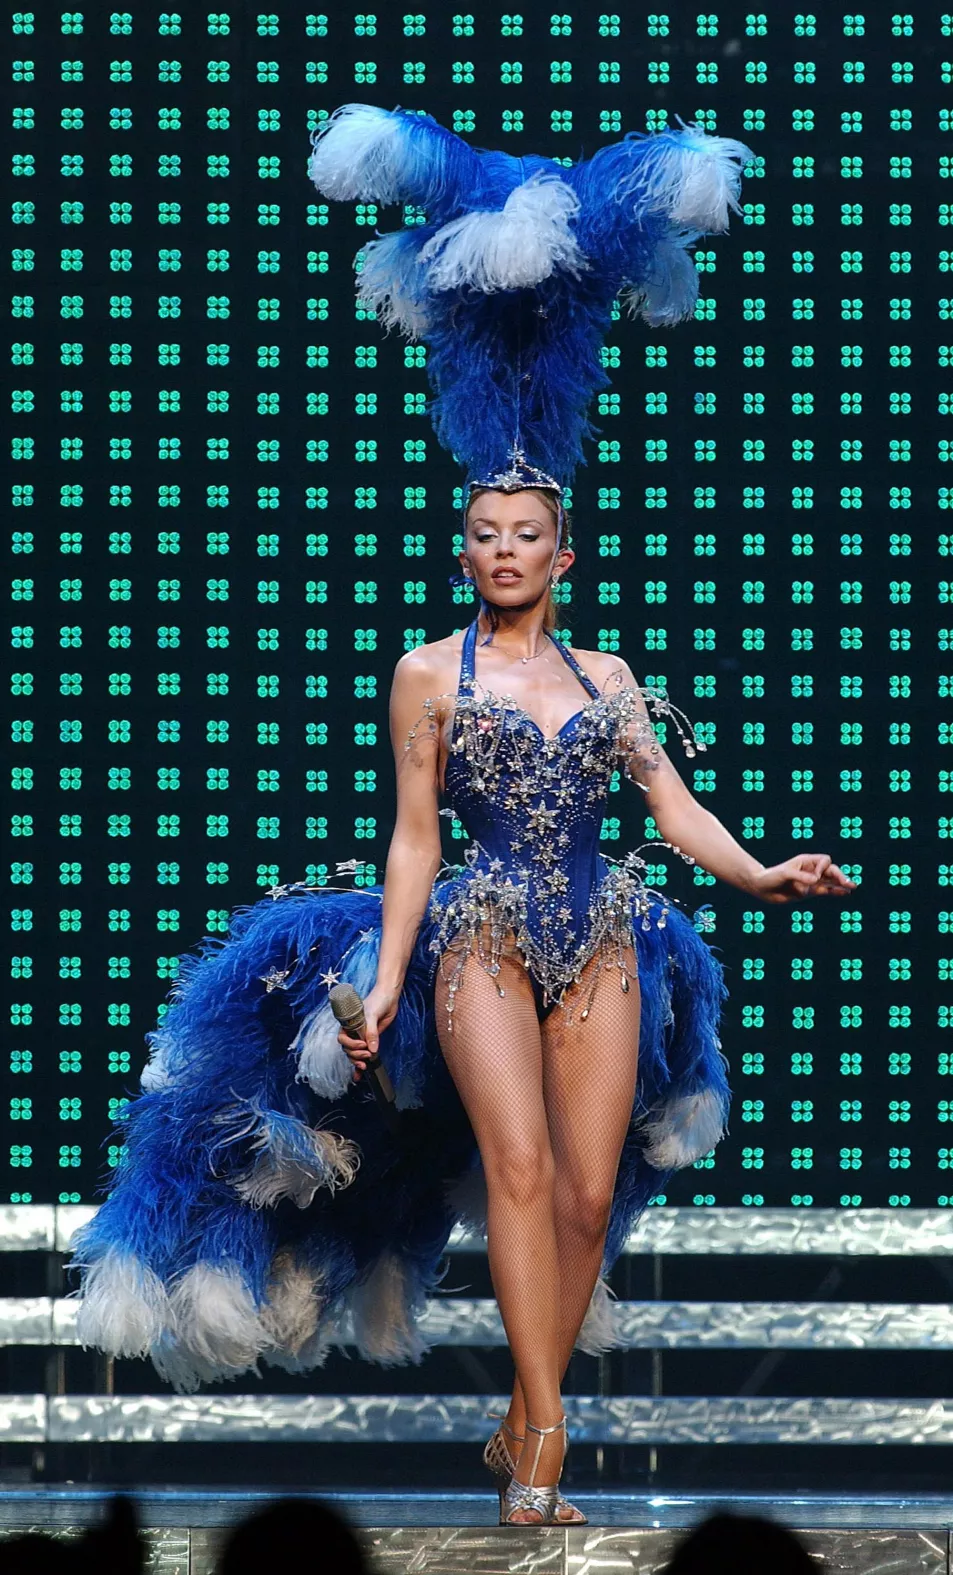 Kylie Minogue performing on stage during her Showgirl tour in 2005